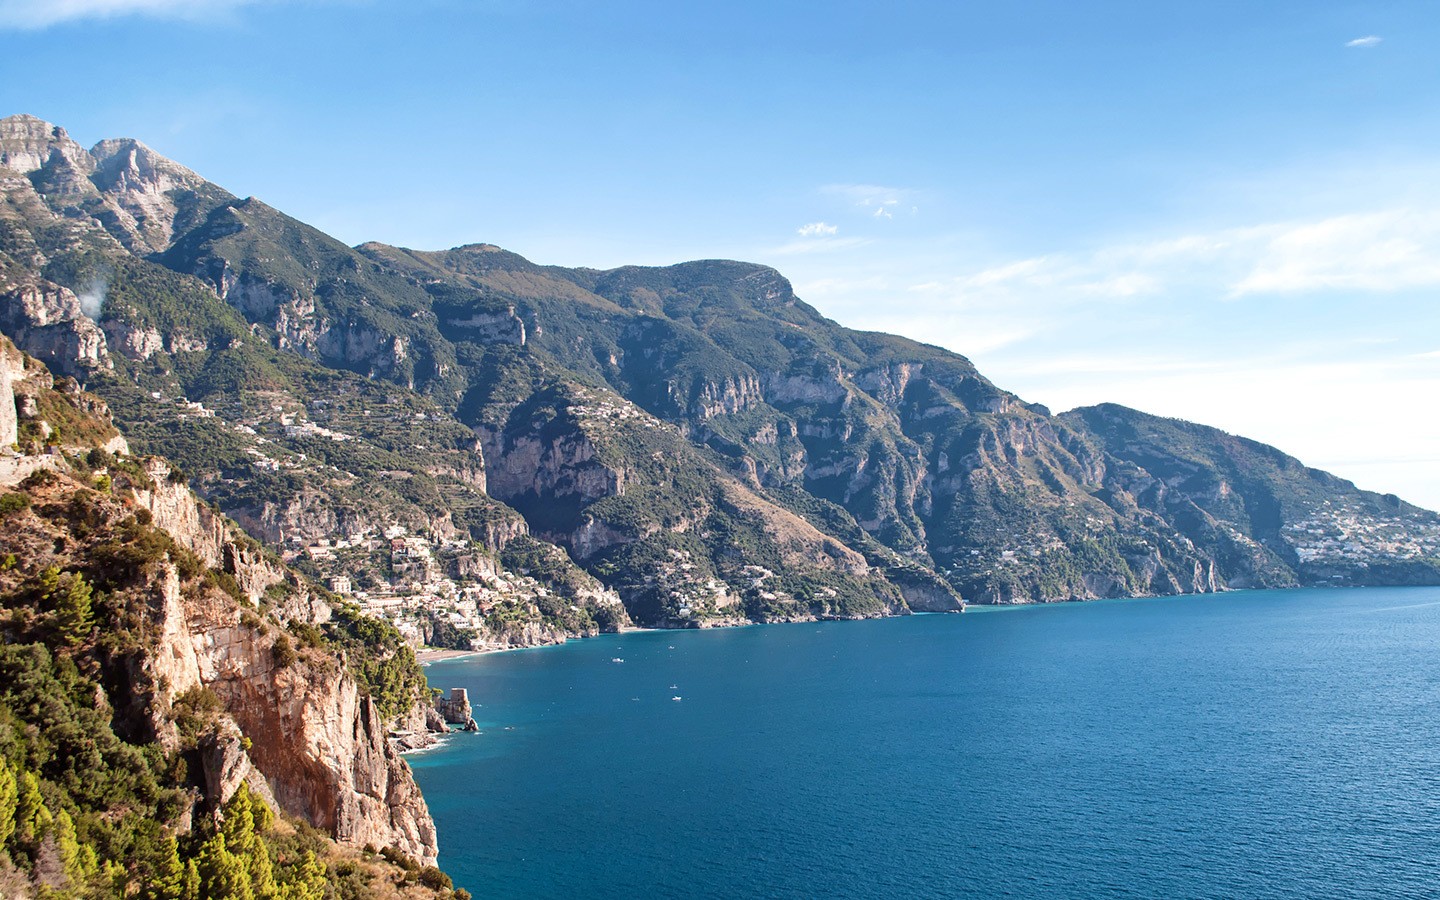 Looking down the Amalfi Coast from the scenic coastal highway